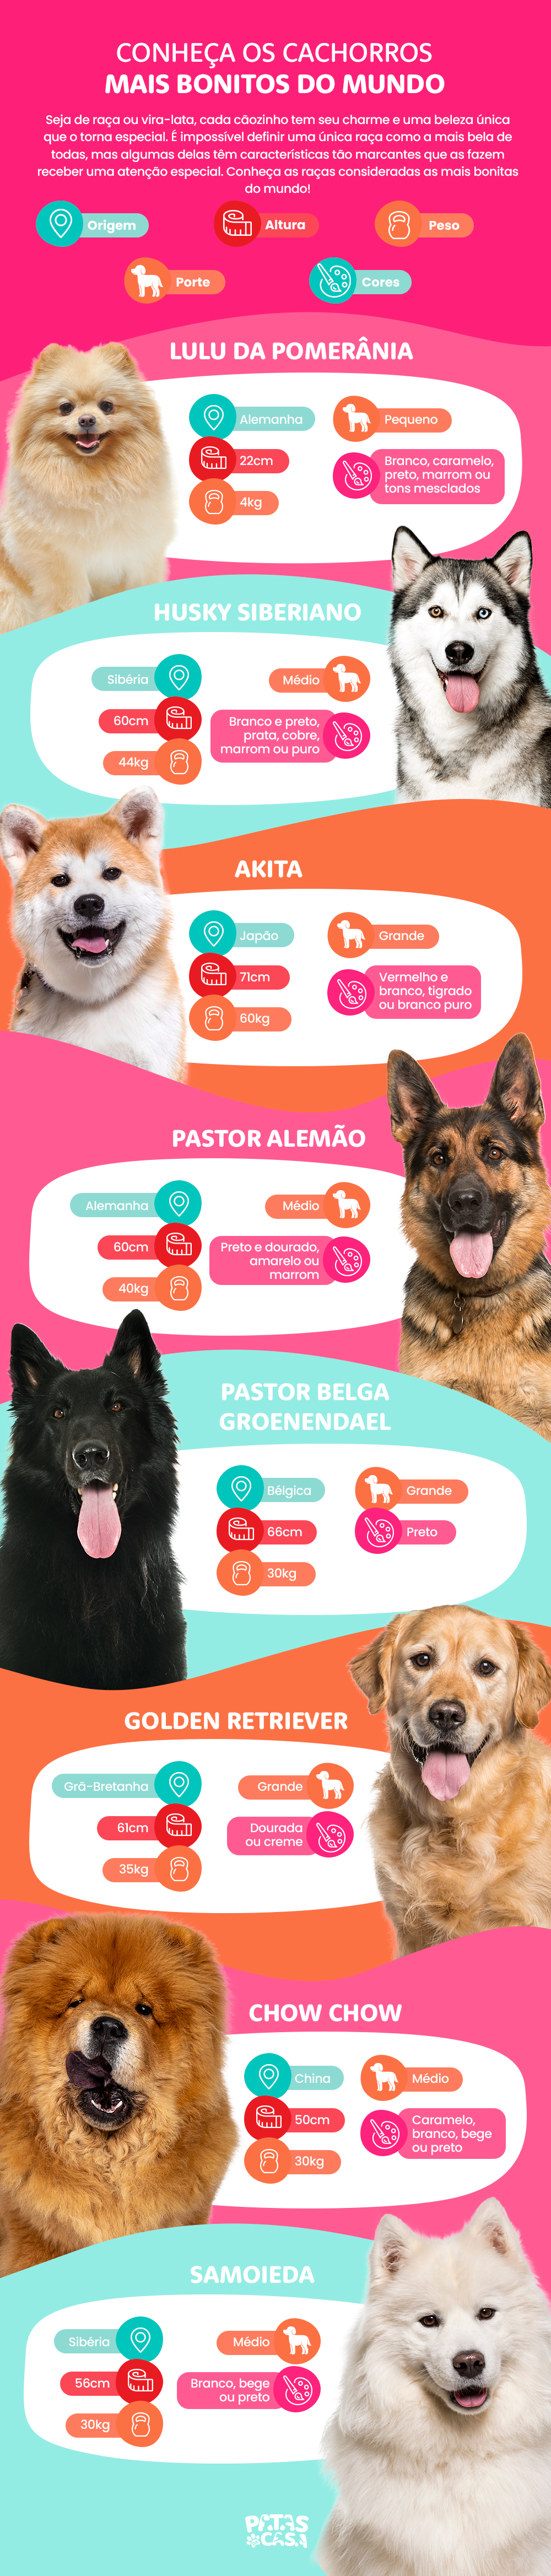  Cutest dog in the world: see infographic with 8 breeds